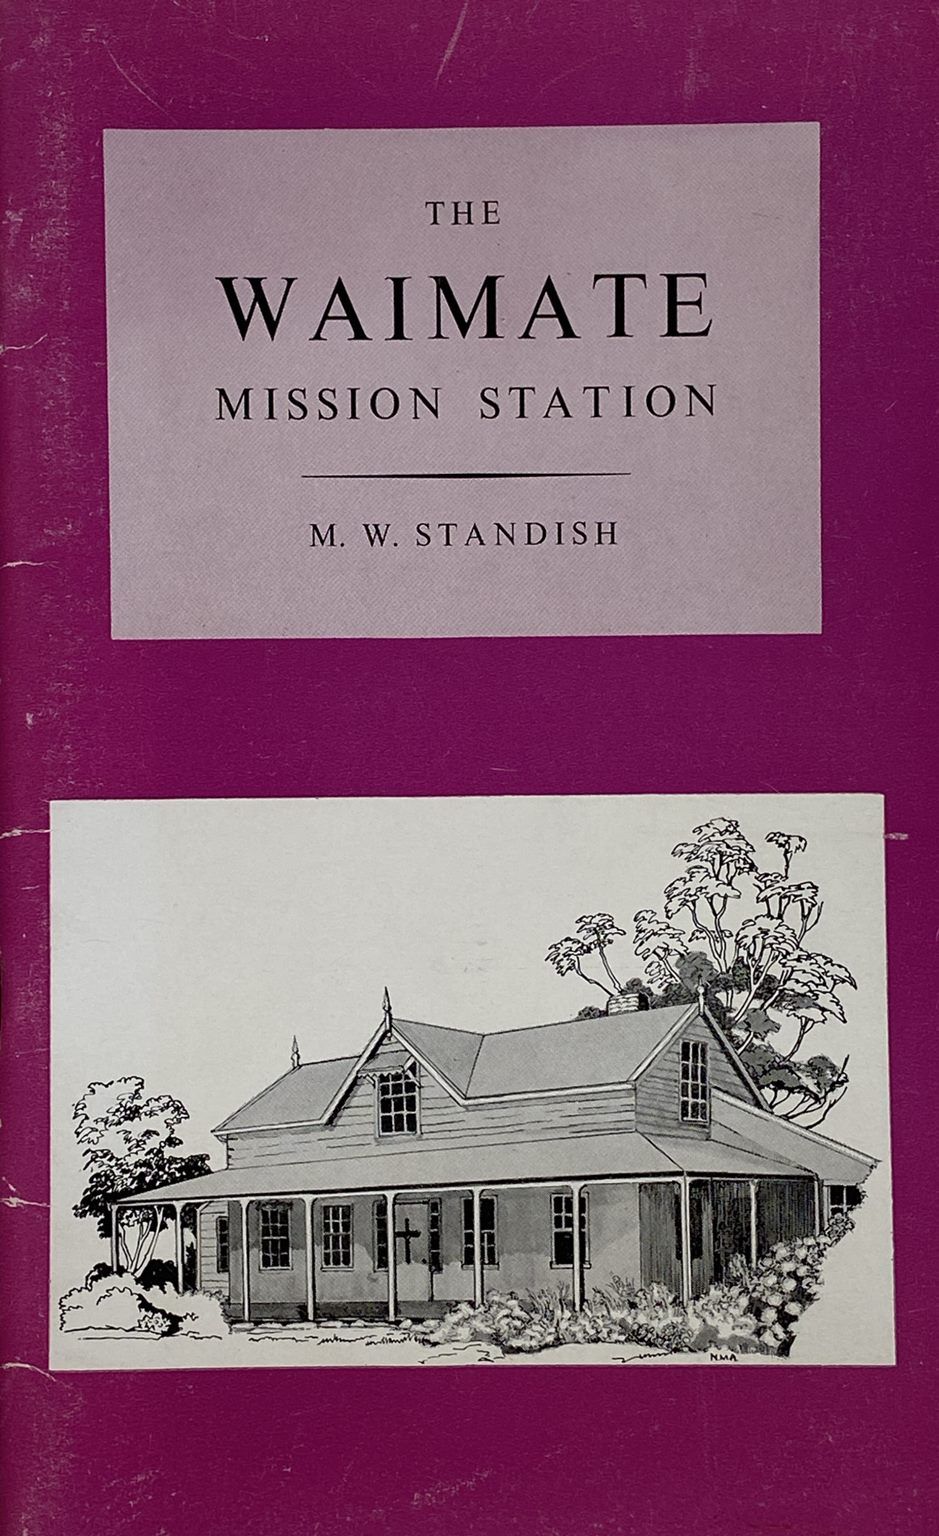 THE WAIMATE MISSION STATION